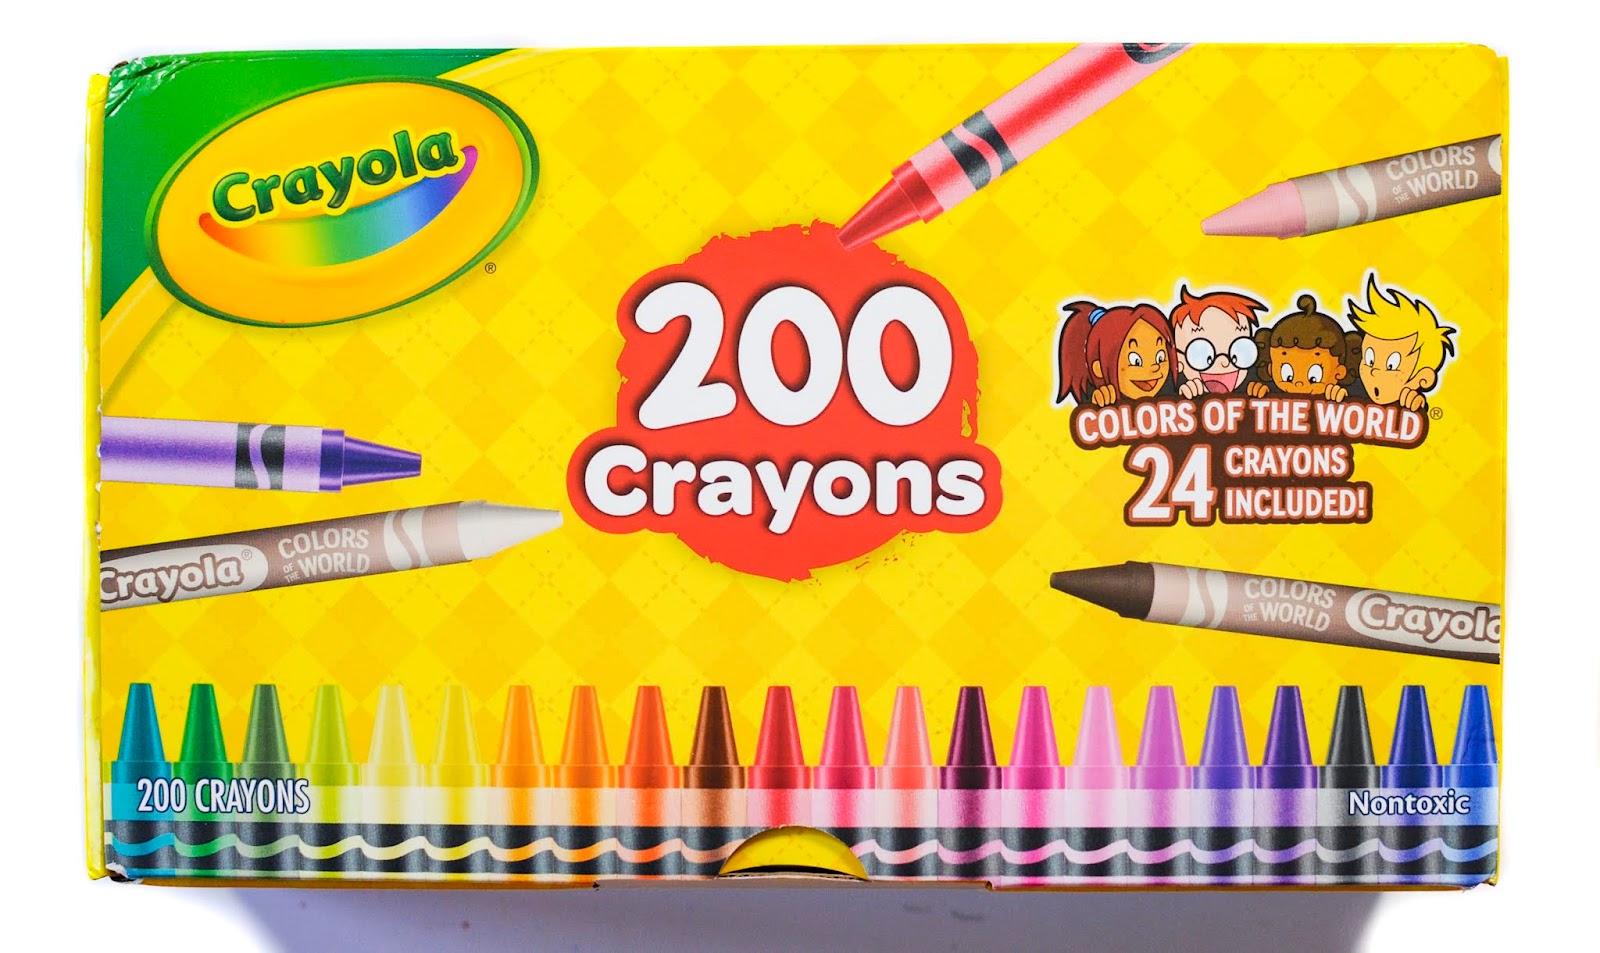 100 Colored Pencils with Colors of the World